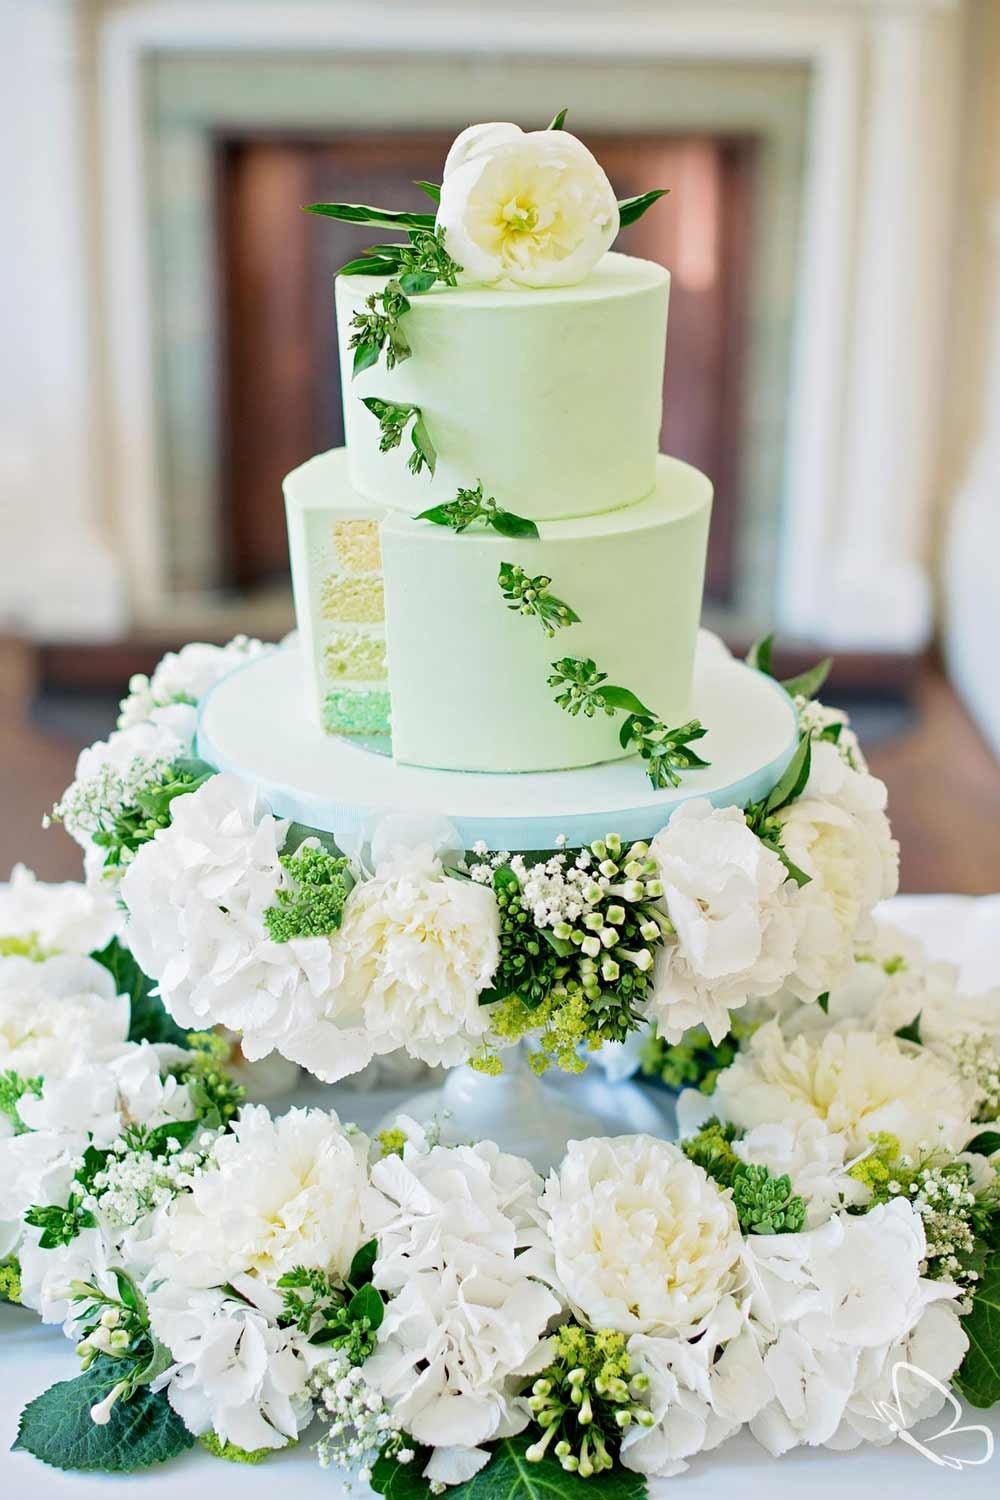 Wedding Cakes With Prices
 Wedding Cake Prices Guide for bud s from £100 to over £